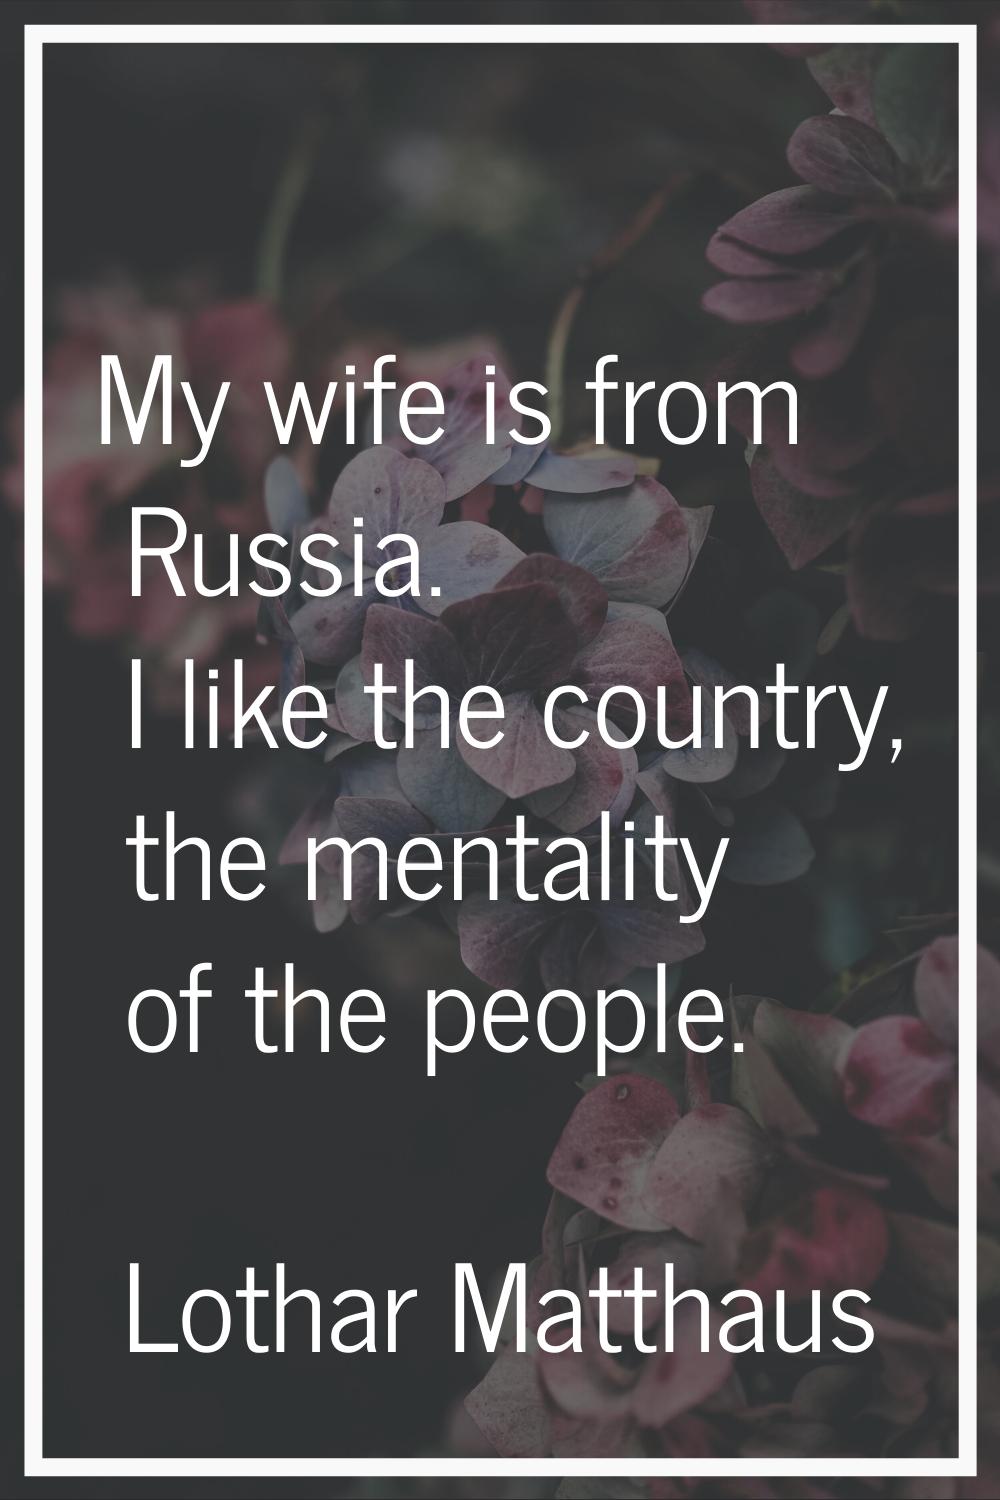 My wife is from Russia. I like the country, the mentality of the people.